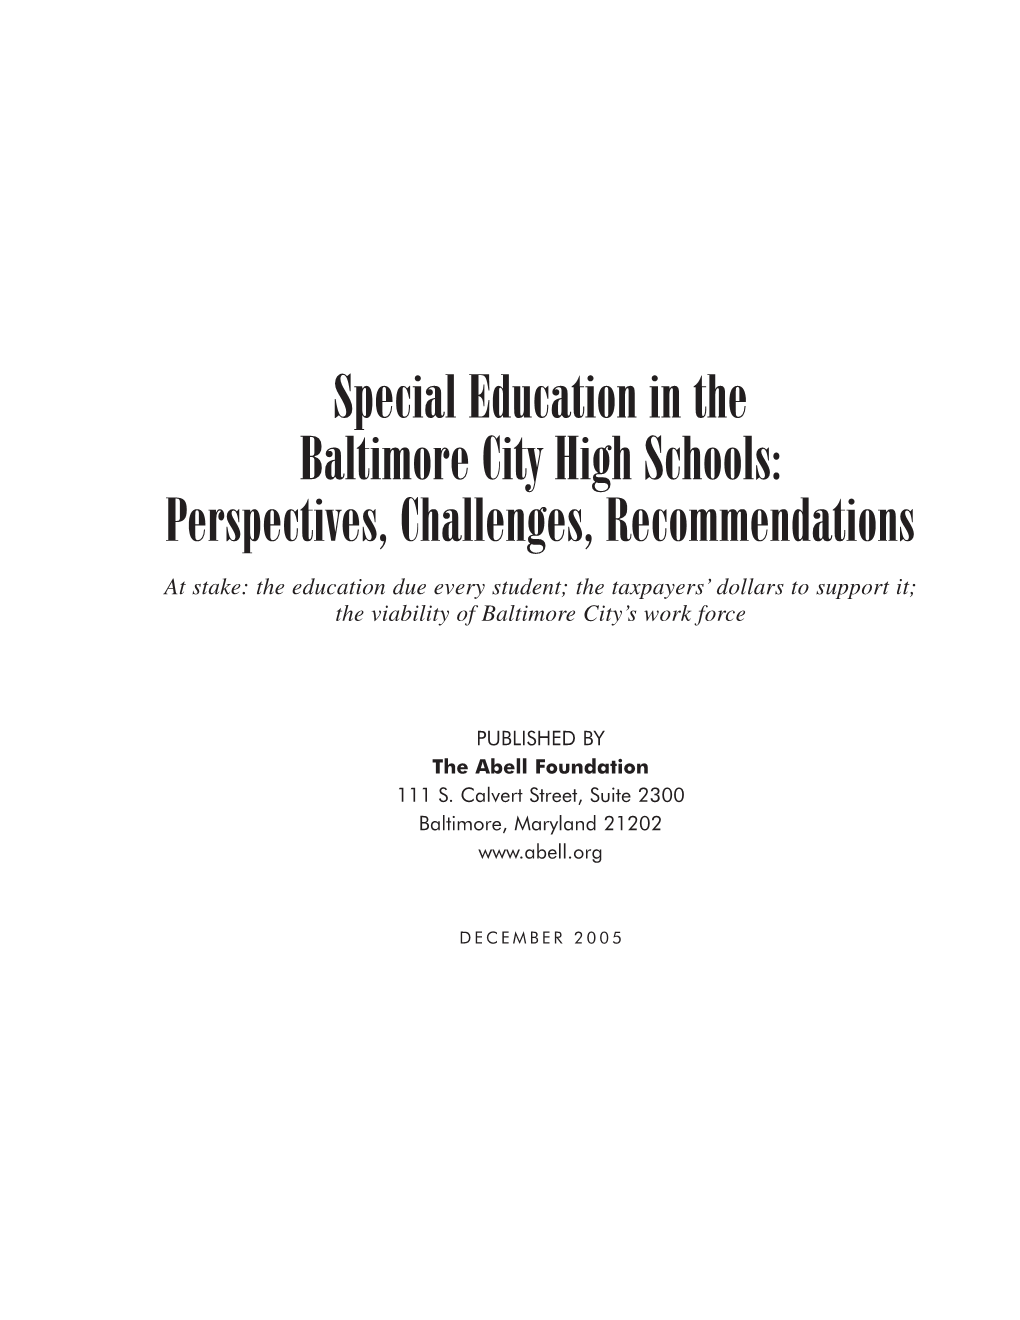 Special Education in the Baltimore City High Schools: Perspectives